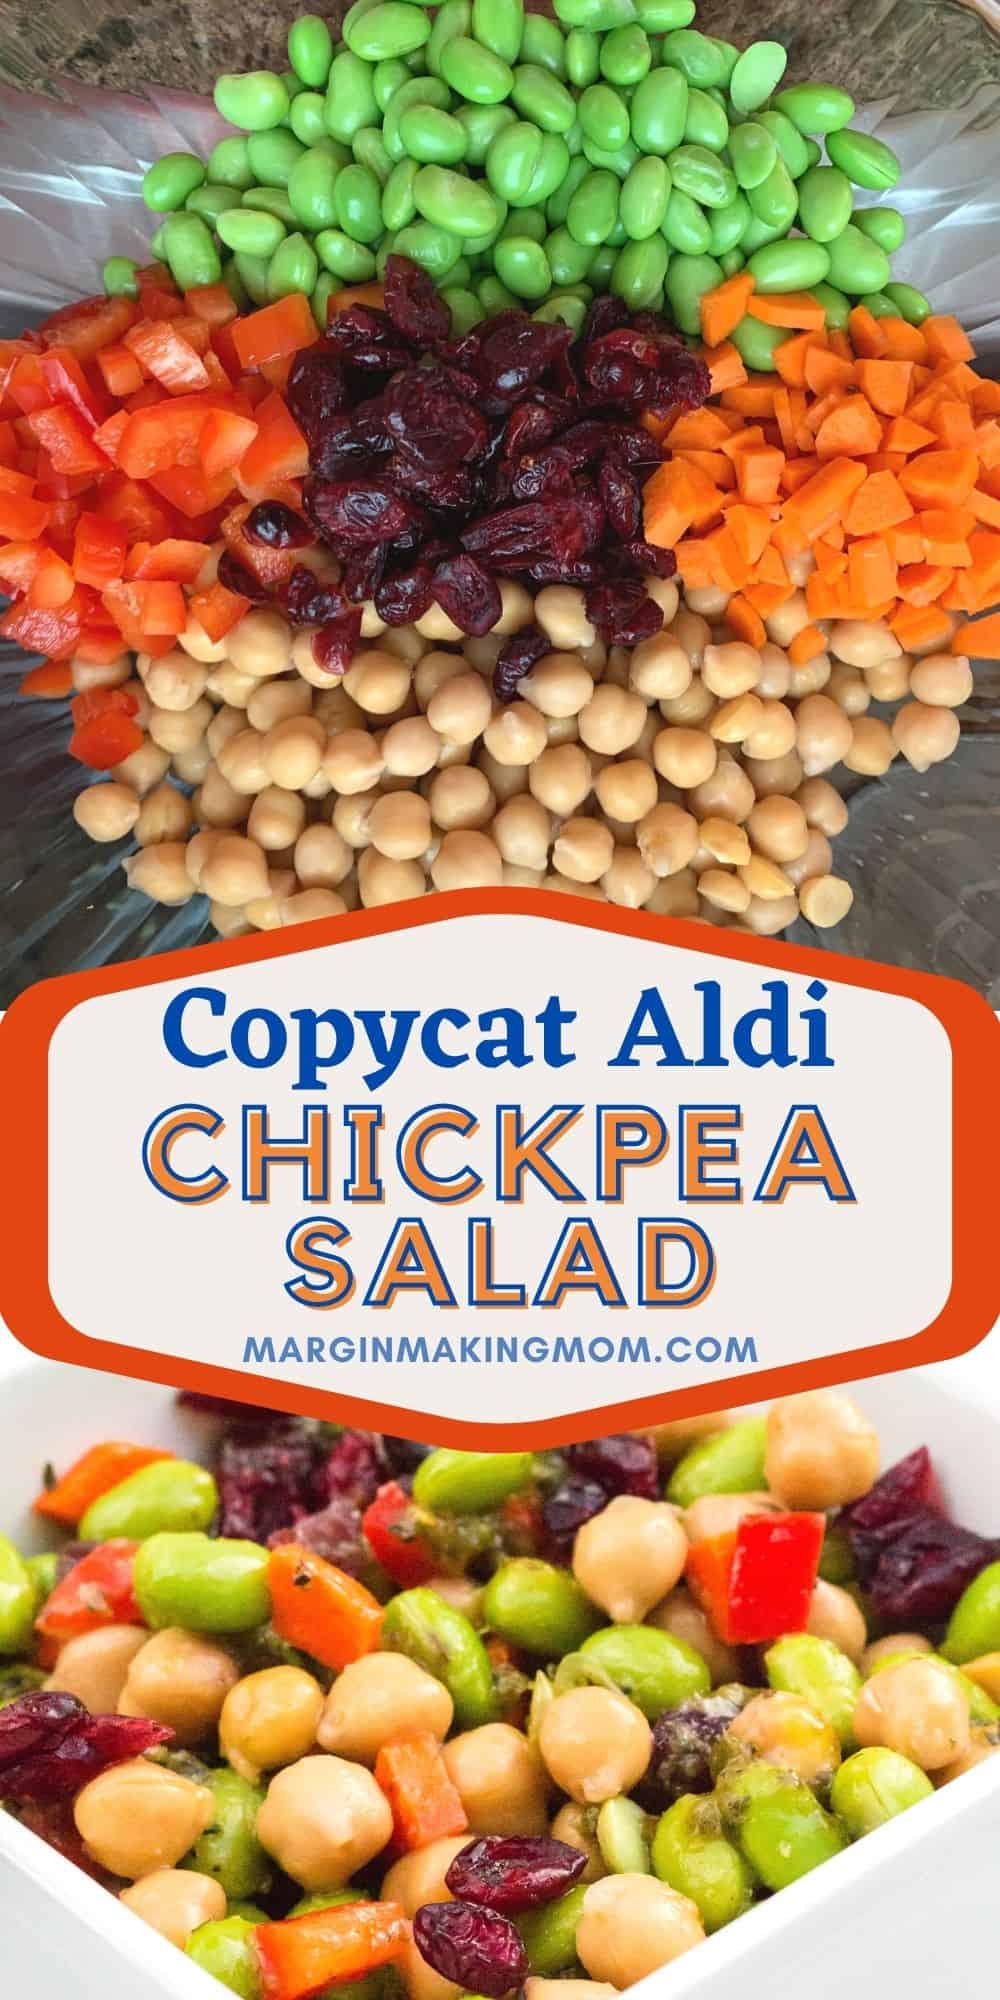 collage image featuring two photos: one shows the ingredients for the aldi copycat chickpea salad, and the other shows the finished salad served in a white bowl